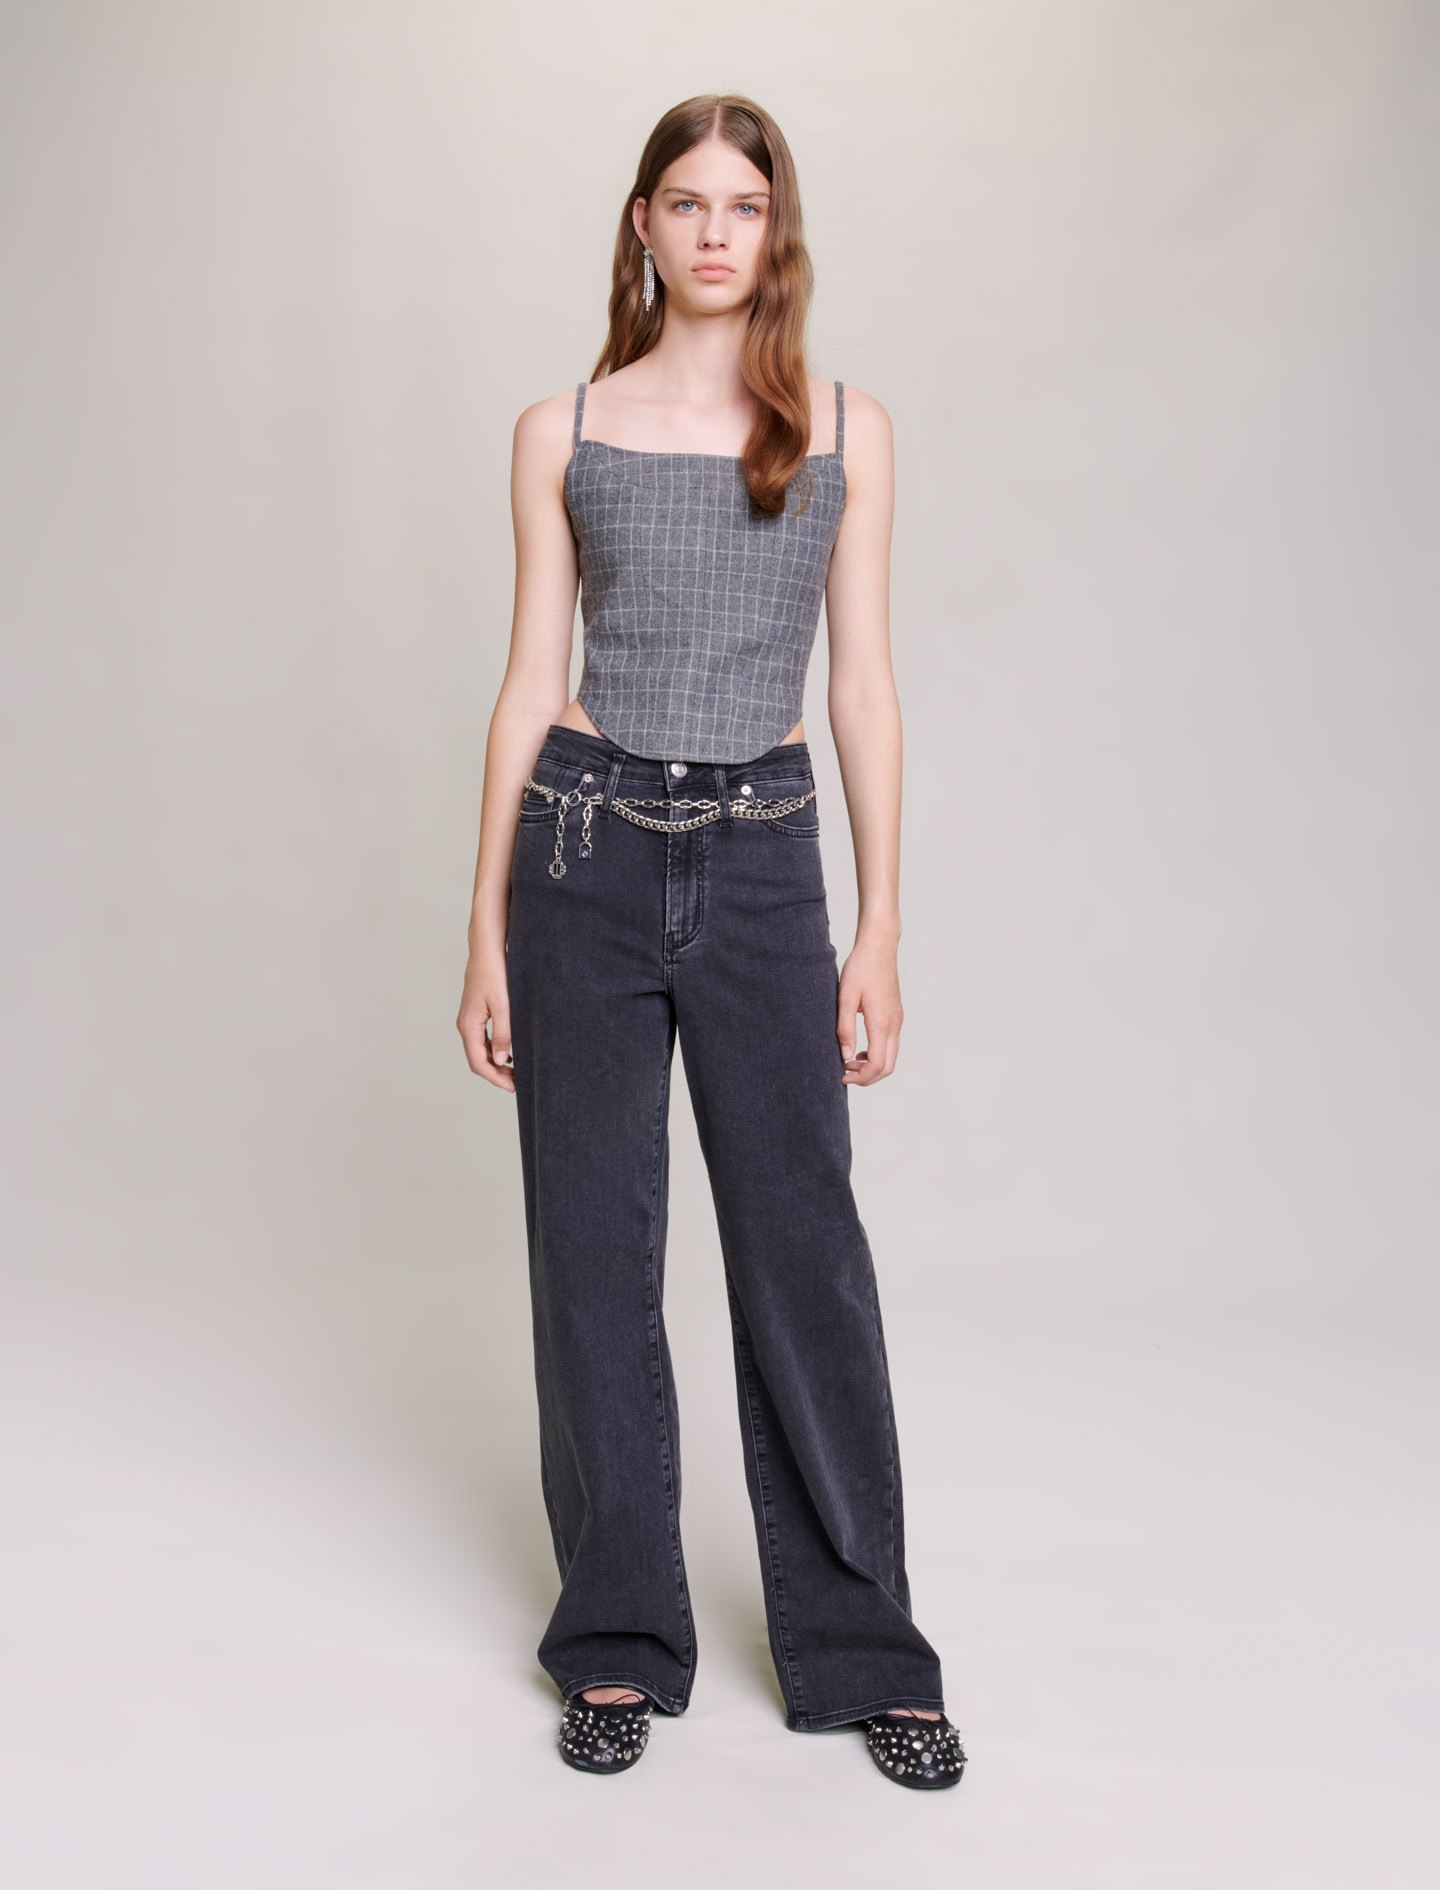 Woman's cotton, Black baggy jeans with belt for Spring/Summer, size Woman-Pants & Jeans-US L / FR 40, in color Black / Black